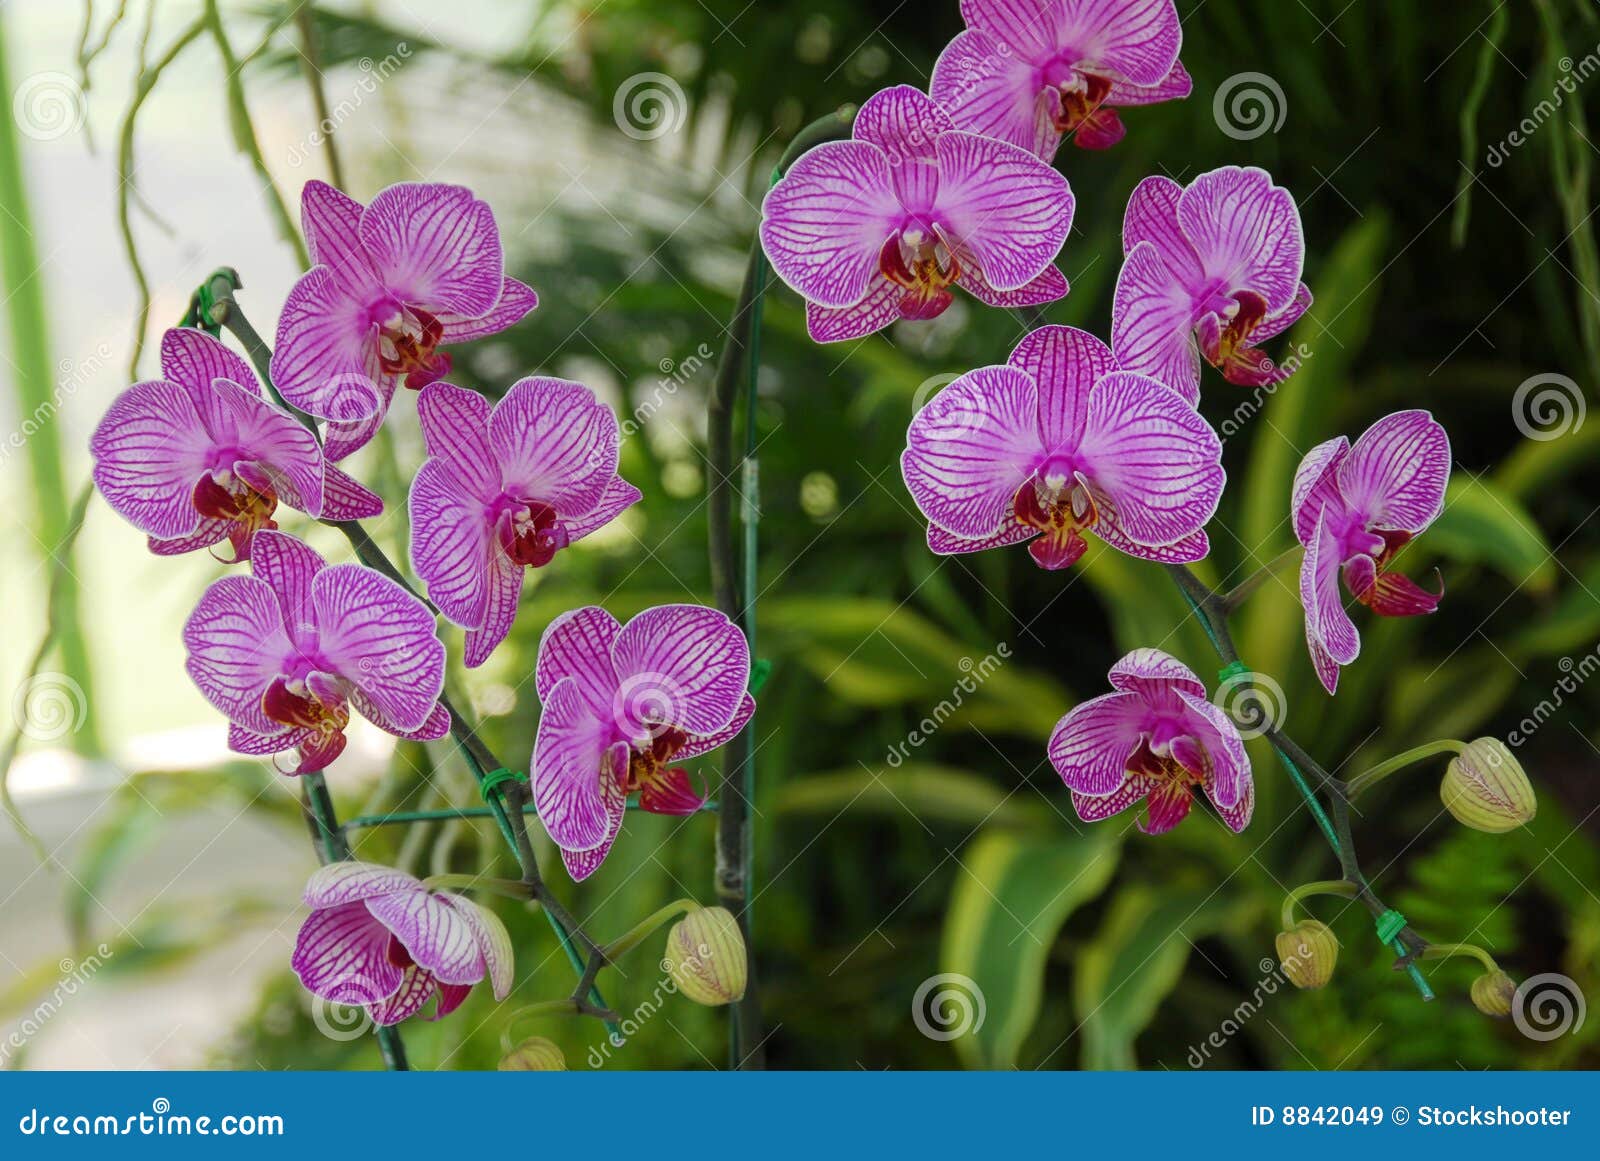 Pink Moth Orchid flower. An isolated shot of Pink Moth Orchid Phalaenopsis flower